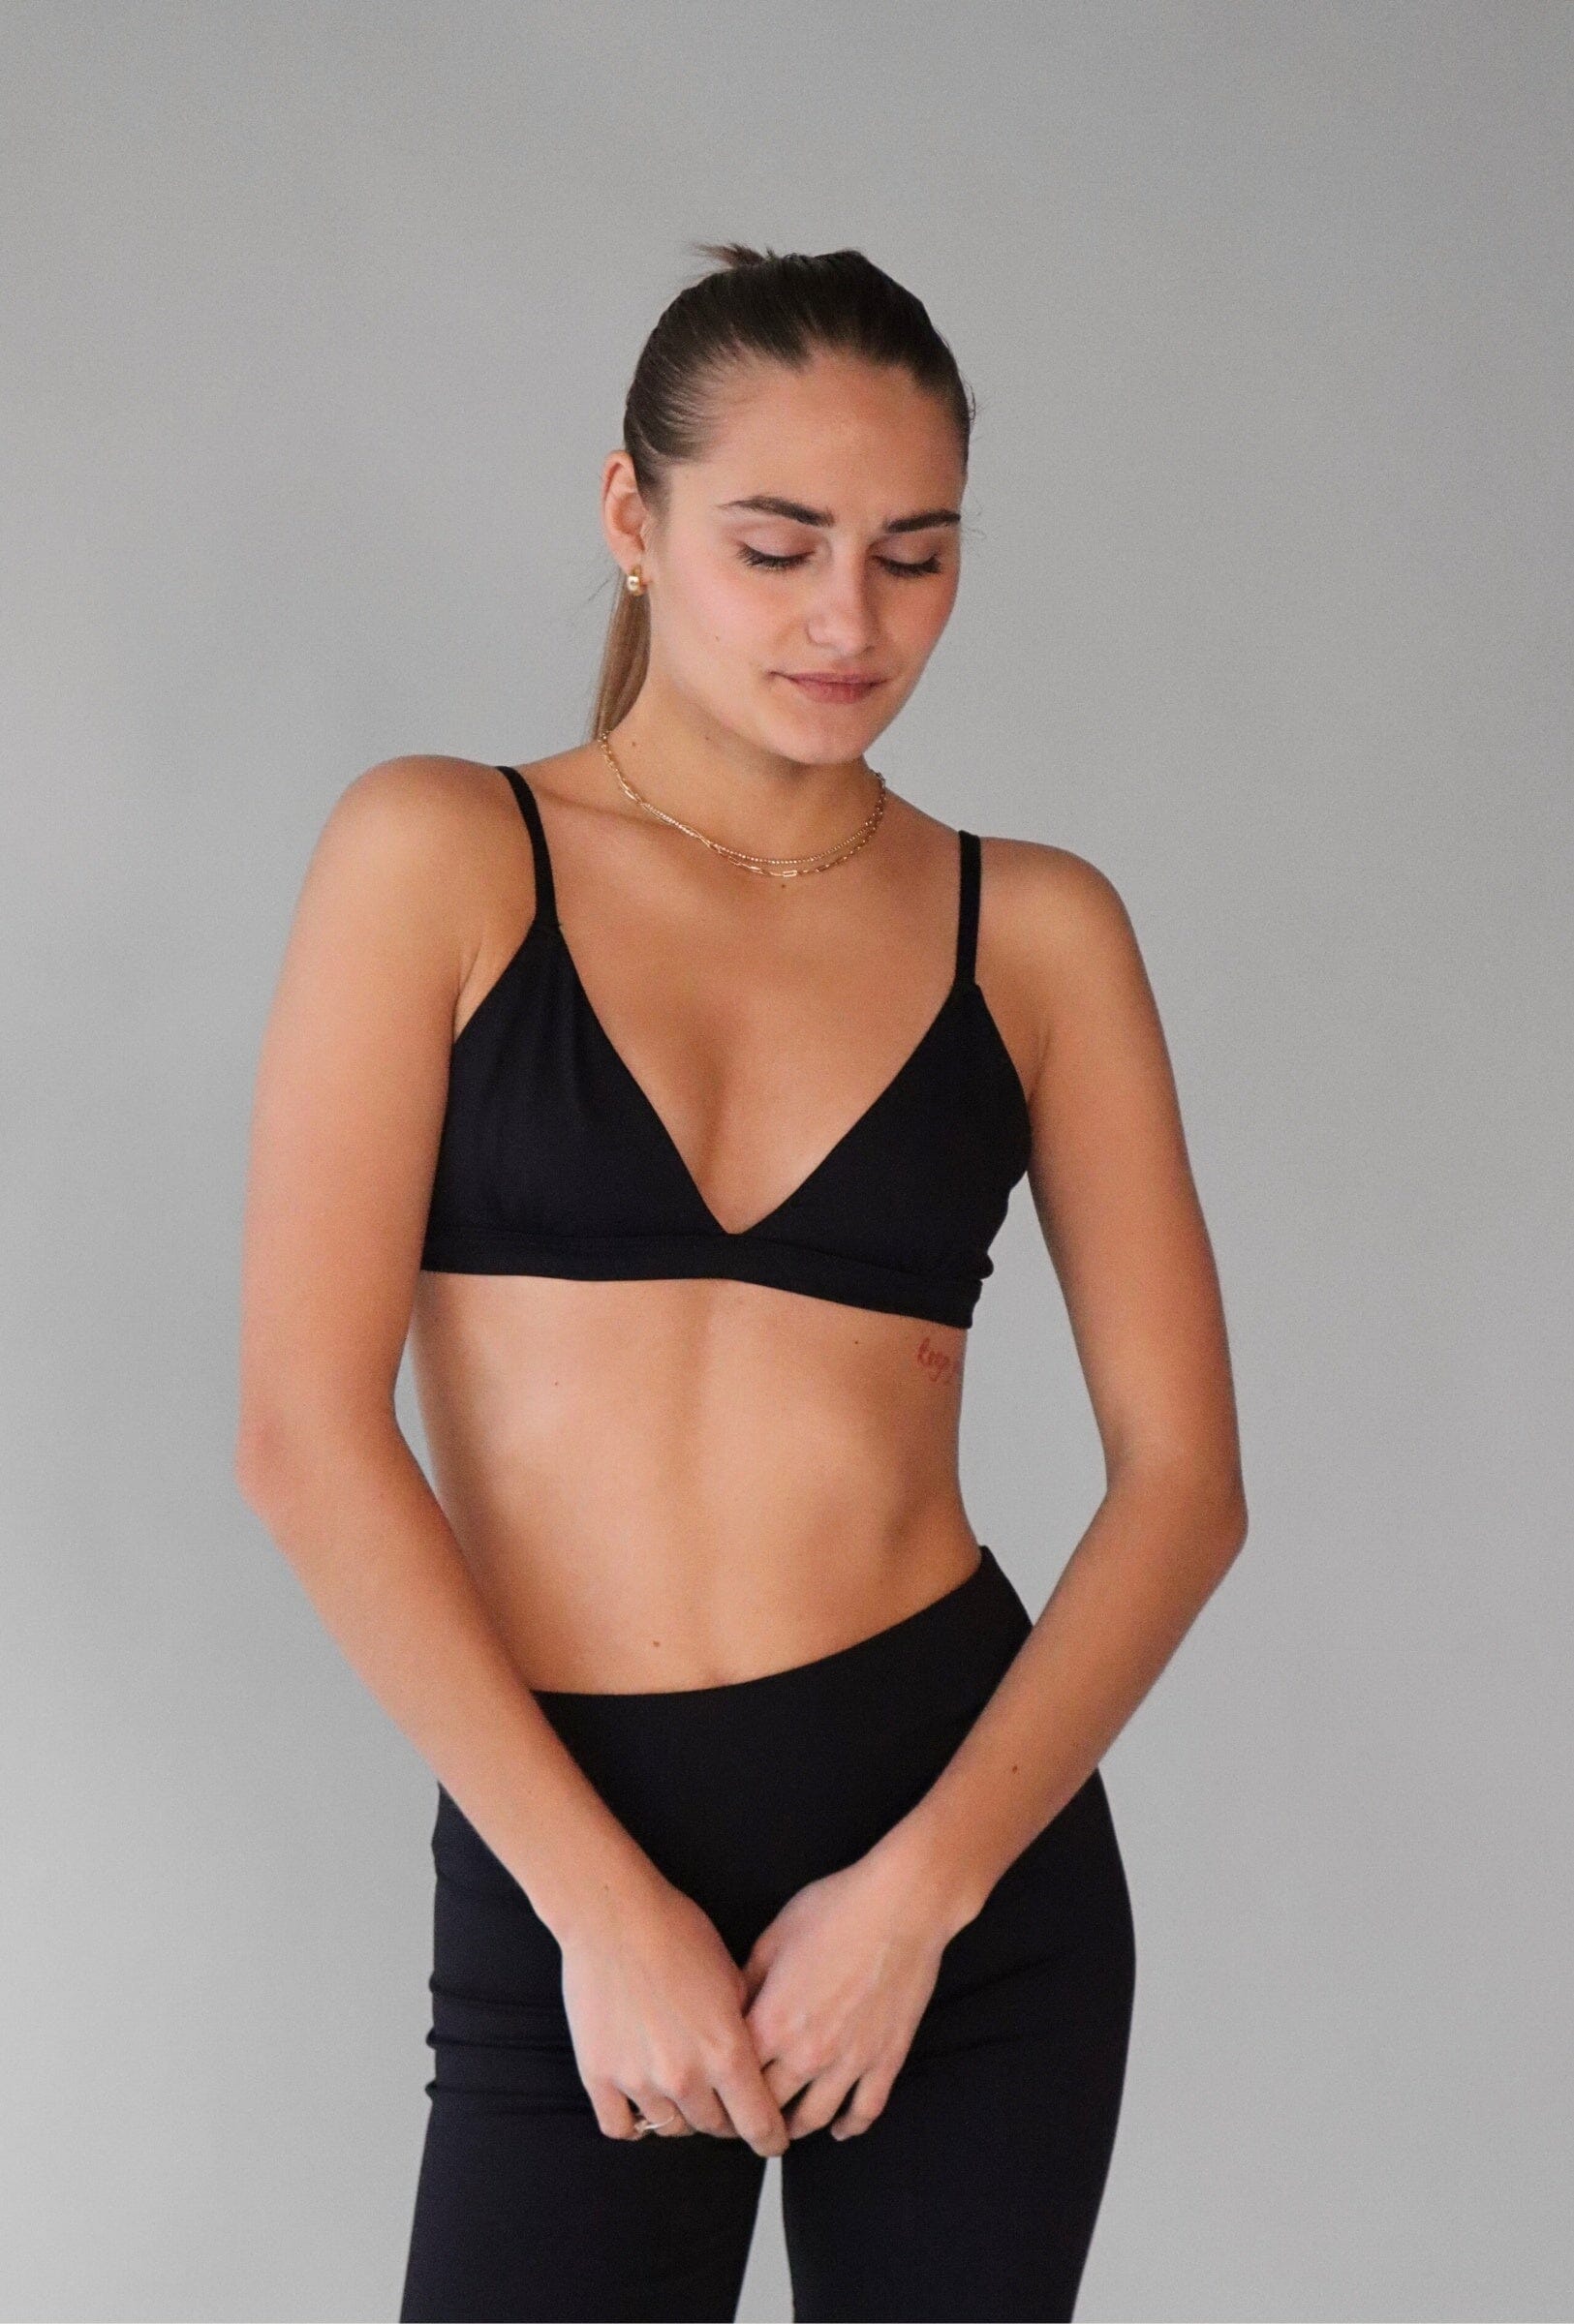 BLACK LAYER BRALETTE Top RD STYLE 